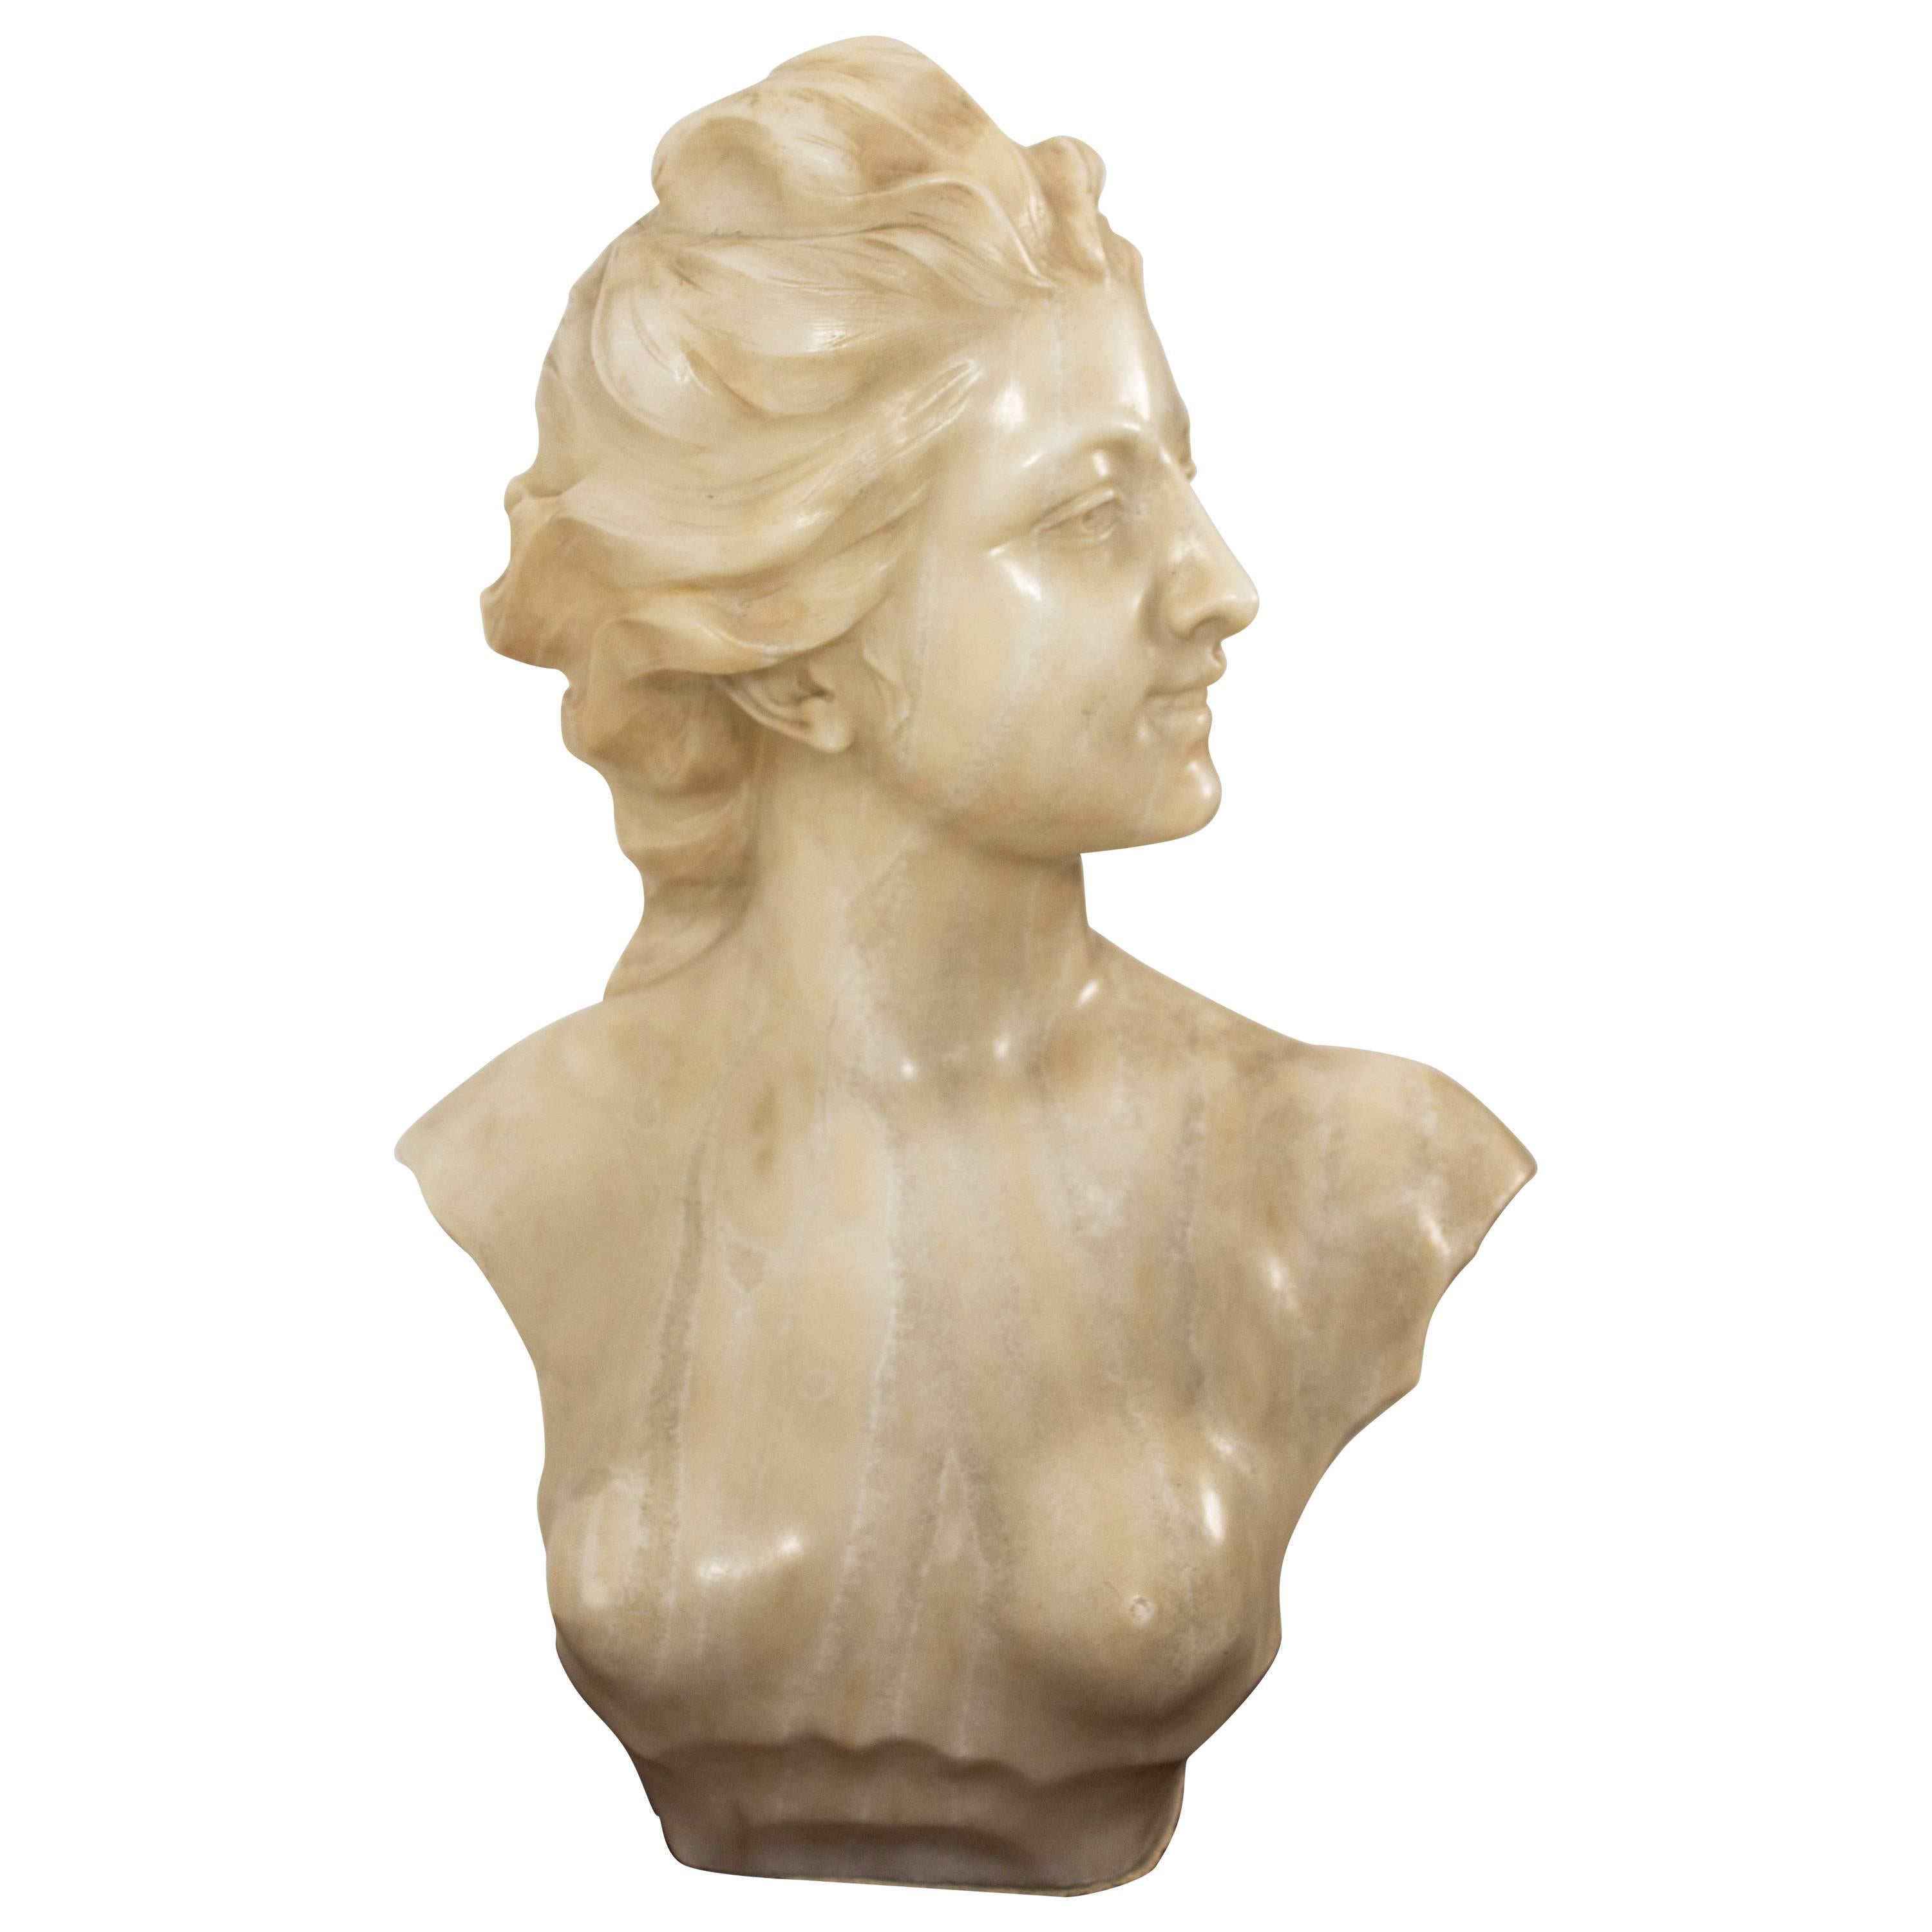 Stunning Art Nouveau Bust of Young Lady by Jef Lambeaux